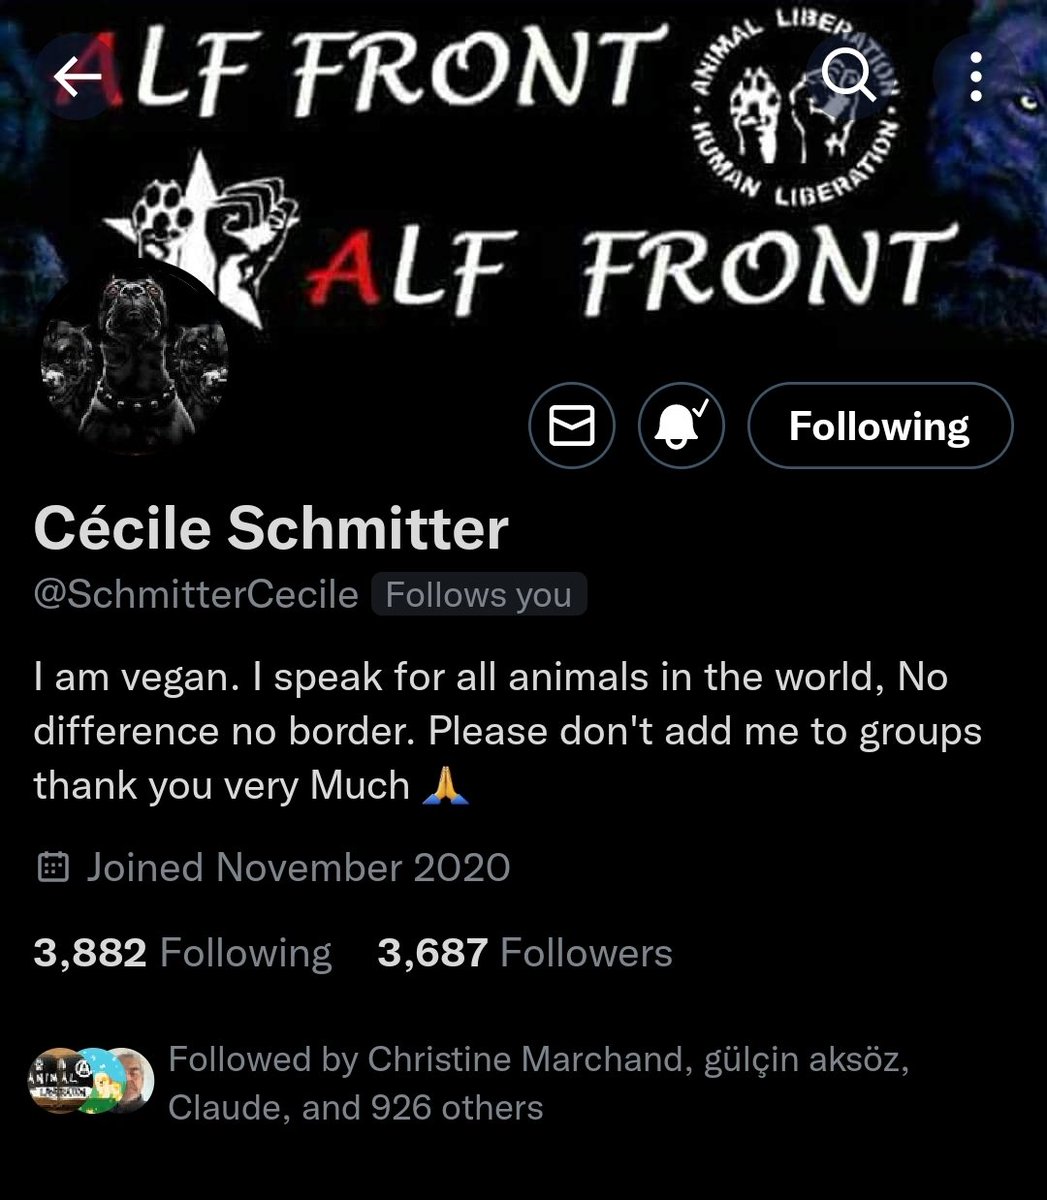 With deep regrets I need to inform you that @SchmitterCecile an amazing fighter for all oppressed will be absent for some while. She has worked endlessly for all especially the most oppressed on this planet the Animals. I will be next to you always.